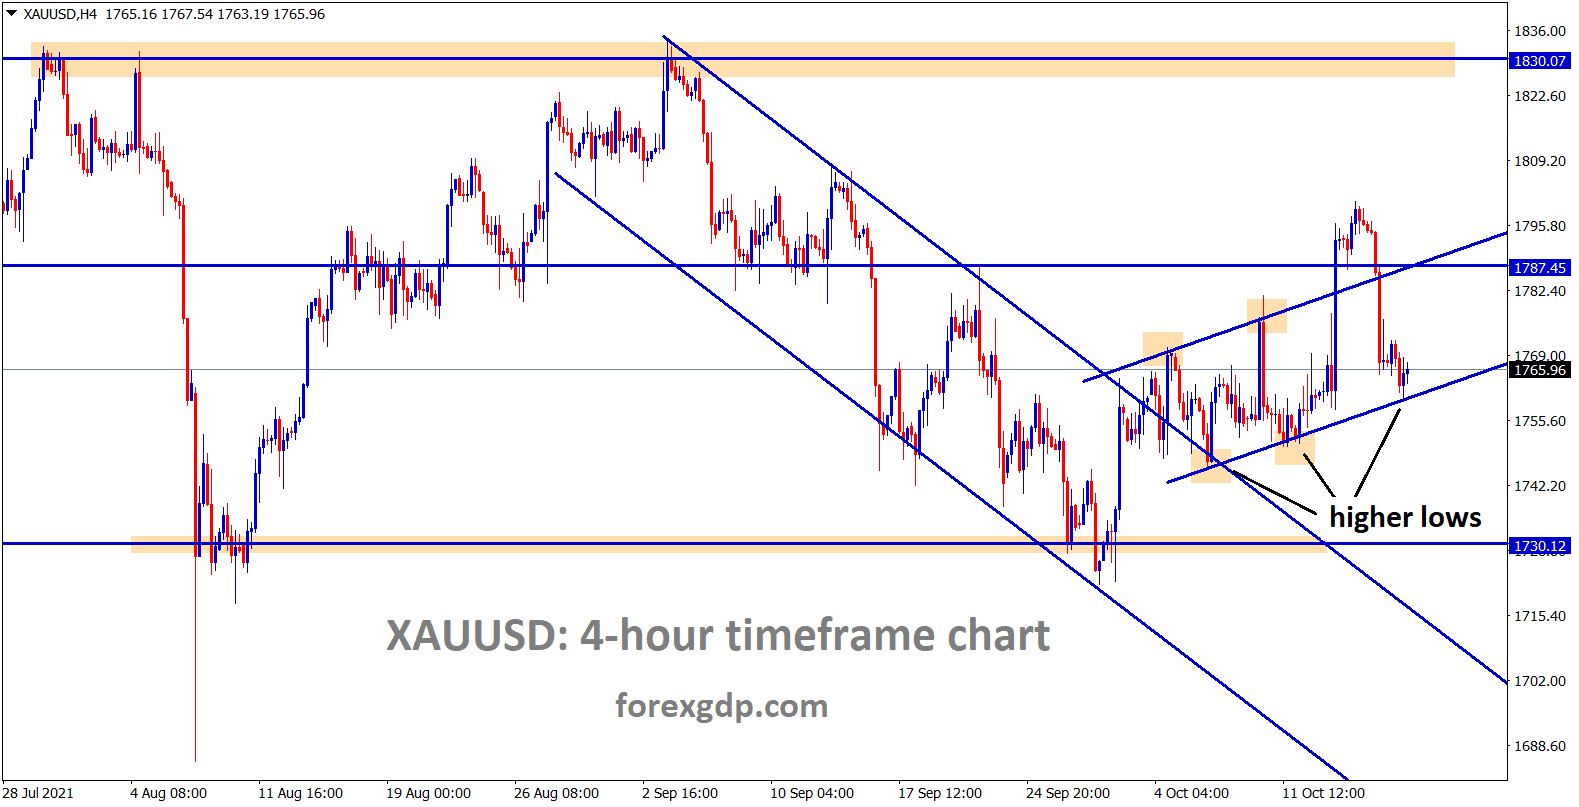 Gold XAUUSD is standing now at the higher low level of the small ascending channel range